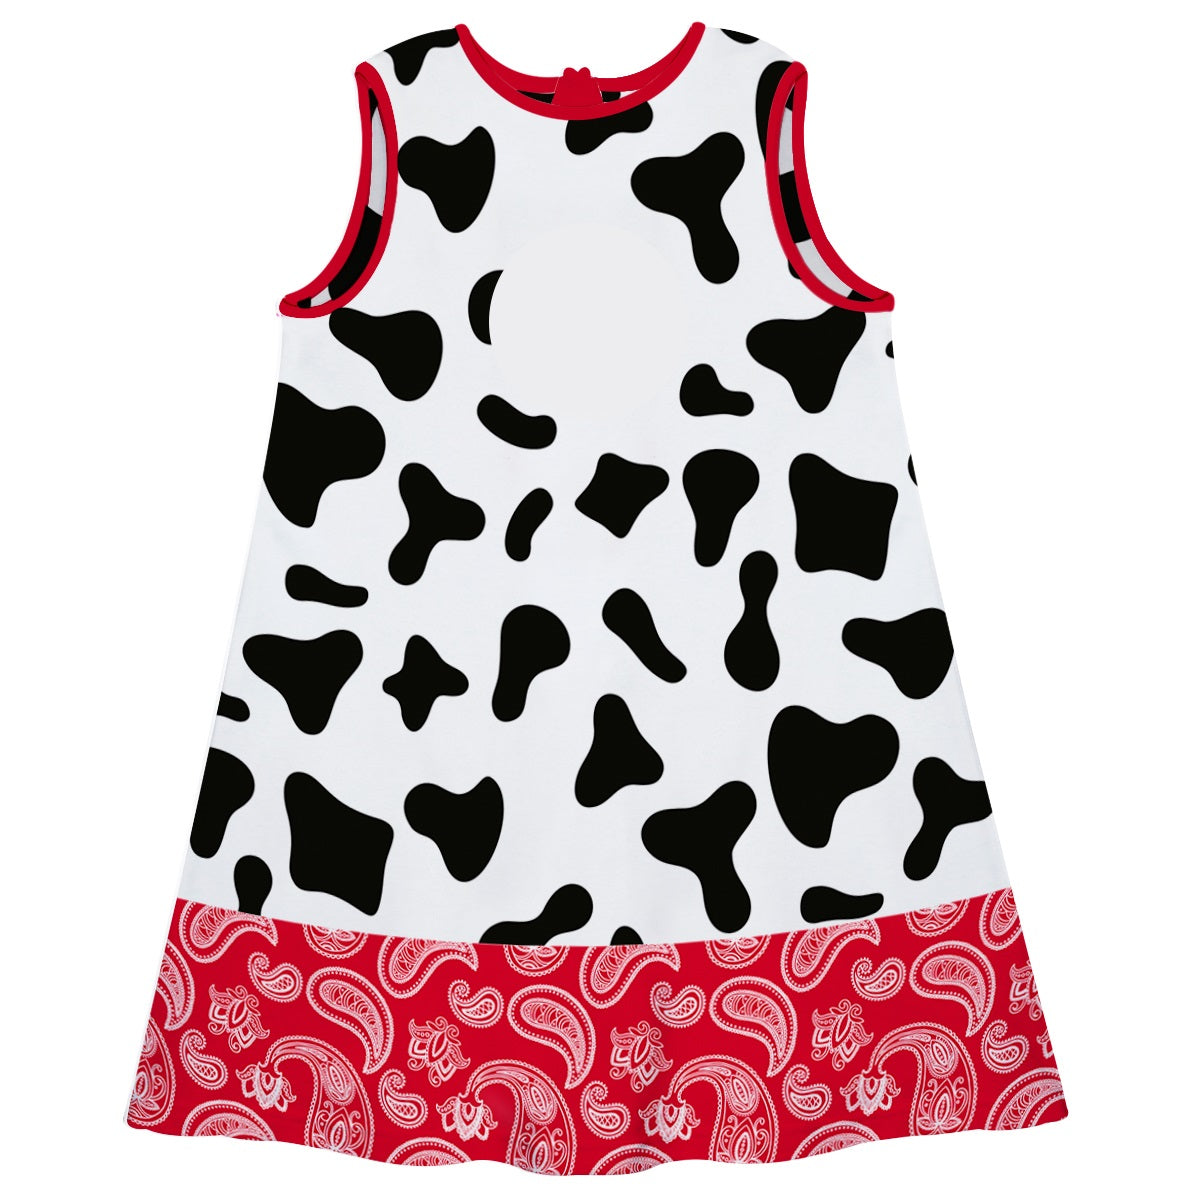 Cow Print Personalized Monogram White and Red A Line Dress - Wimziy&Co.